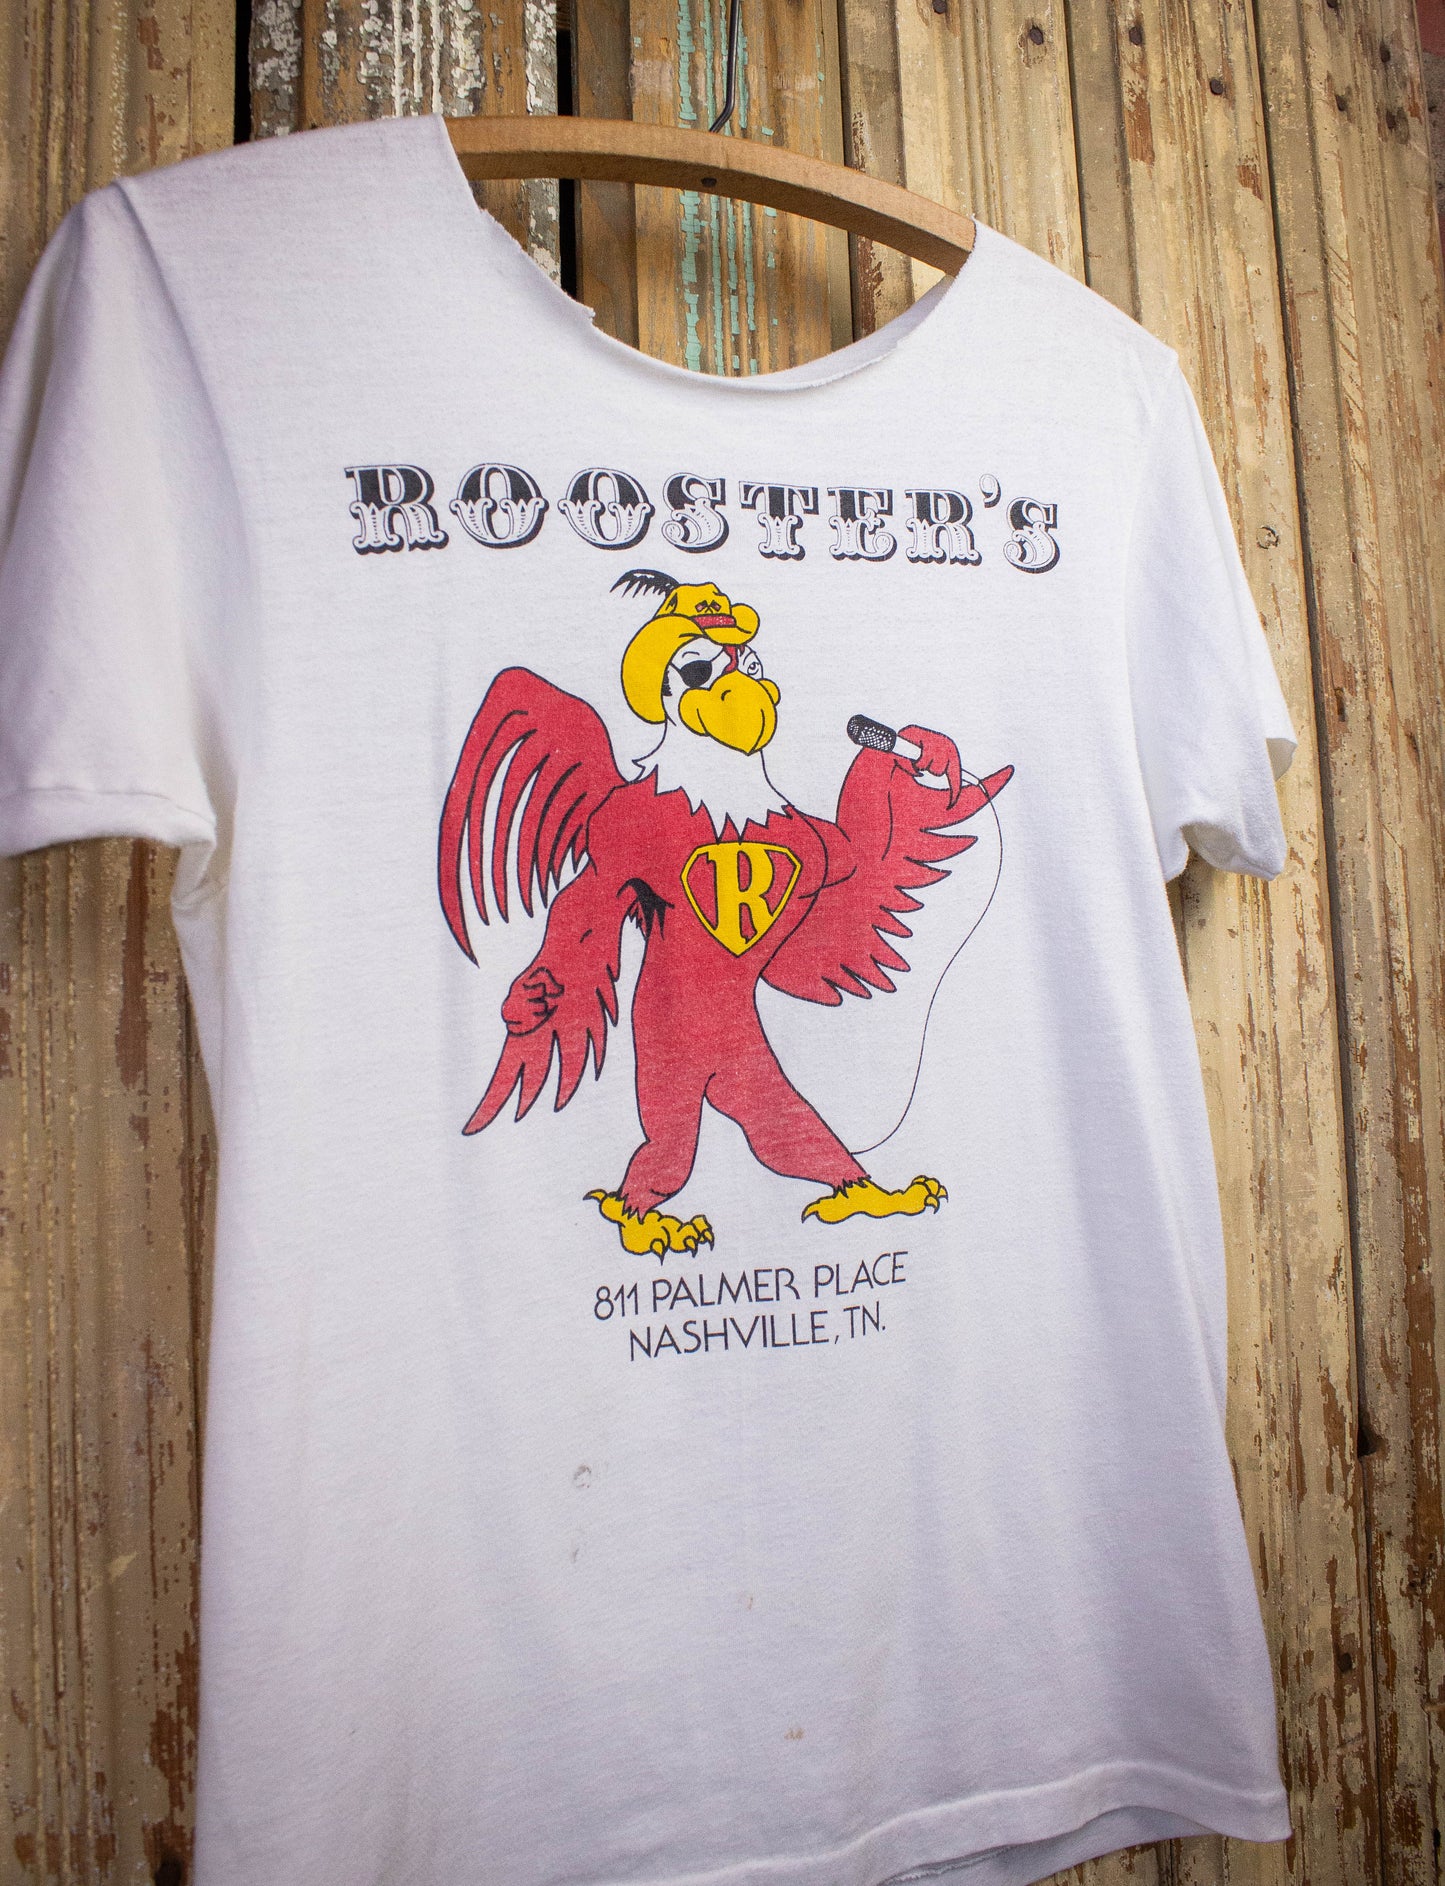 Vintage Rooster's Back To School Jam Graphic T Shirt 1985 White Small